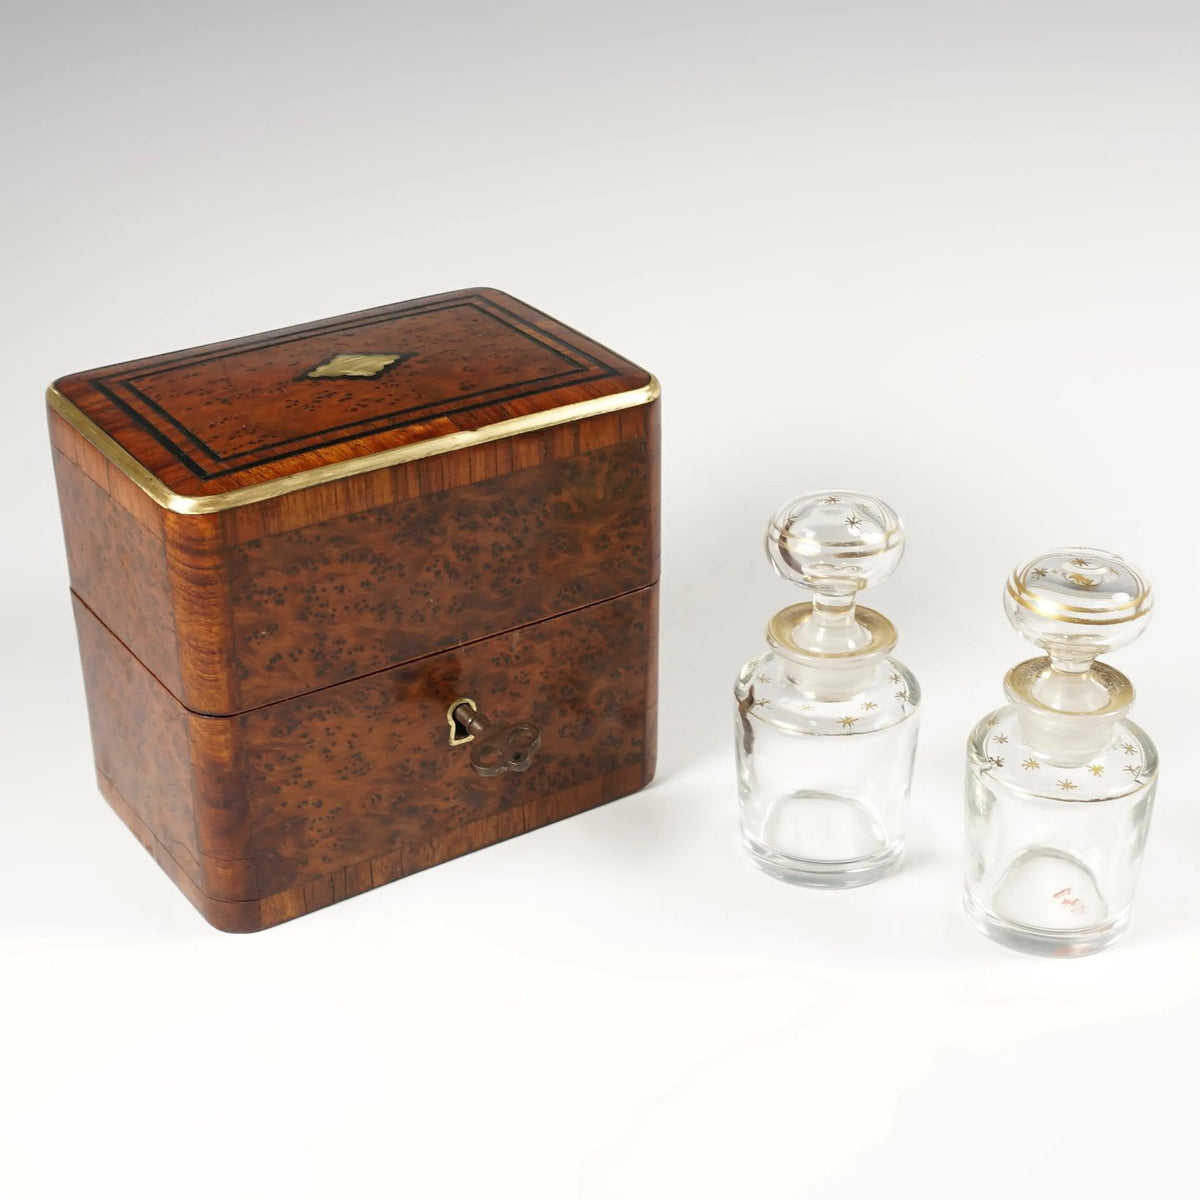 Antique Burl Wood Box With Chanel Perfume Bottles